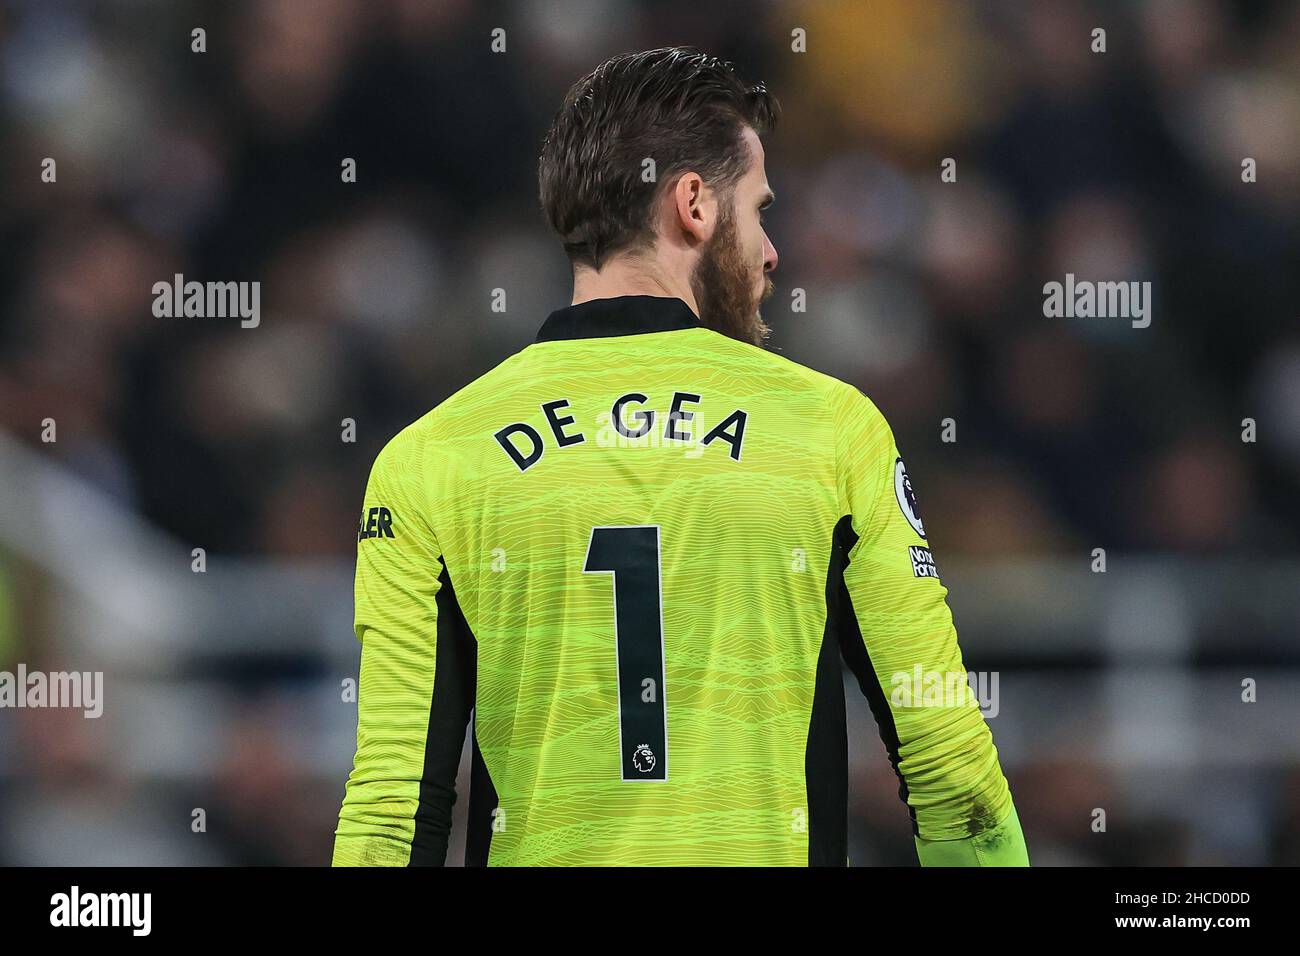 Page 4 - De Gea Manchester United High Resolution Stock Photography and  Images - Alamy